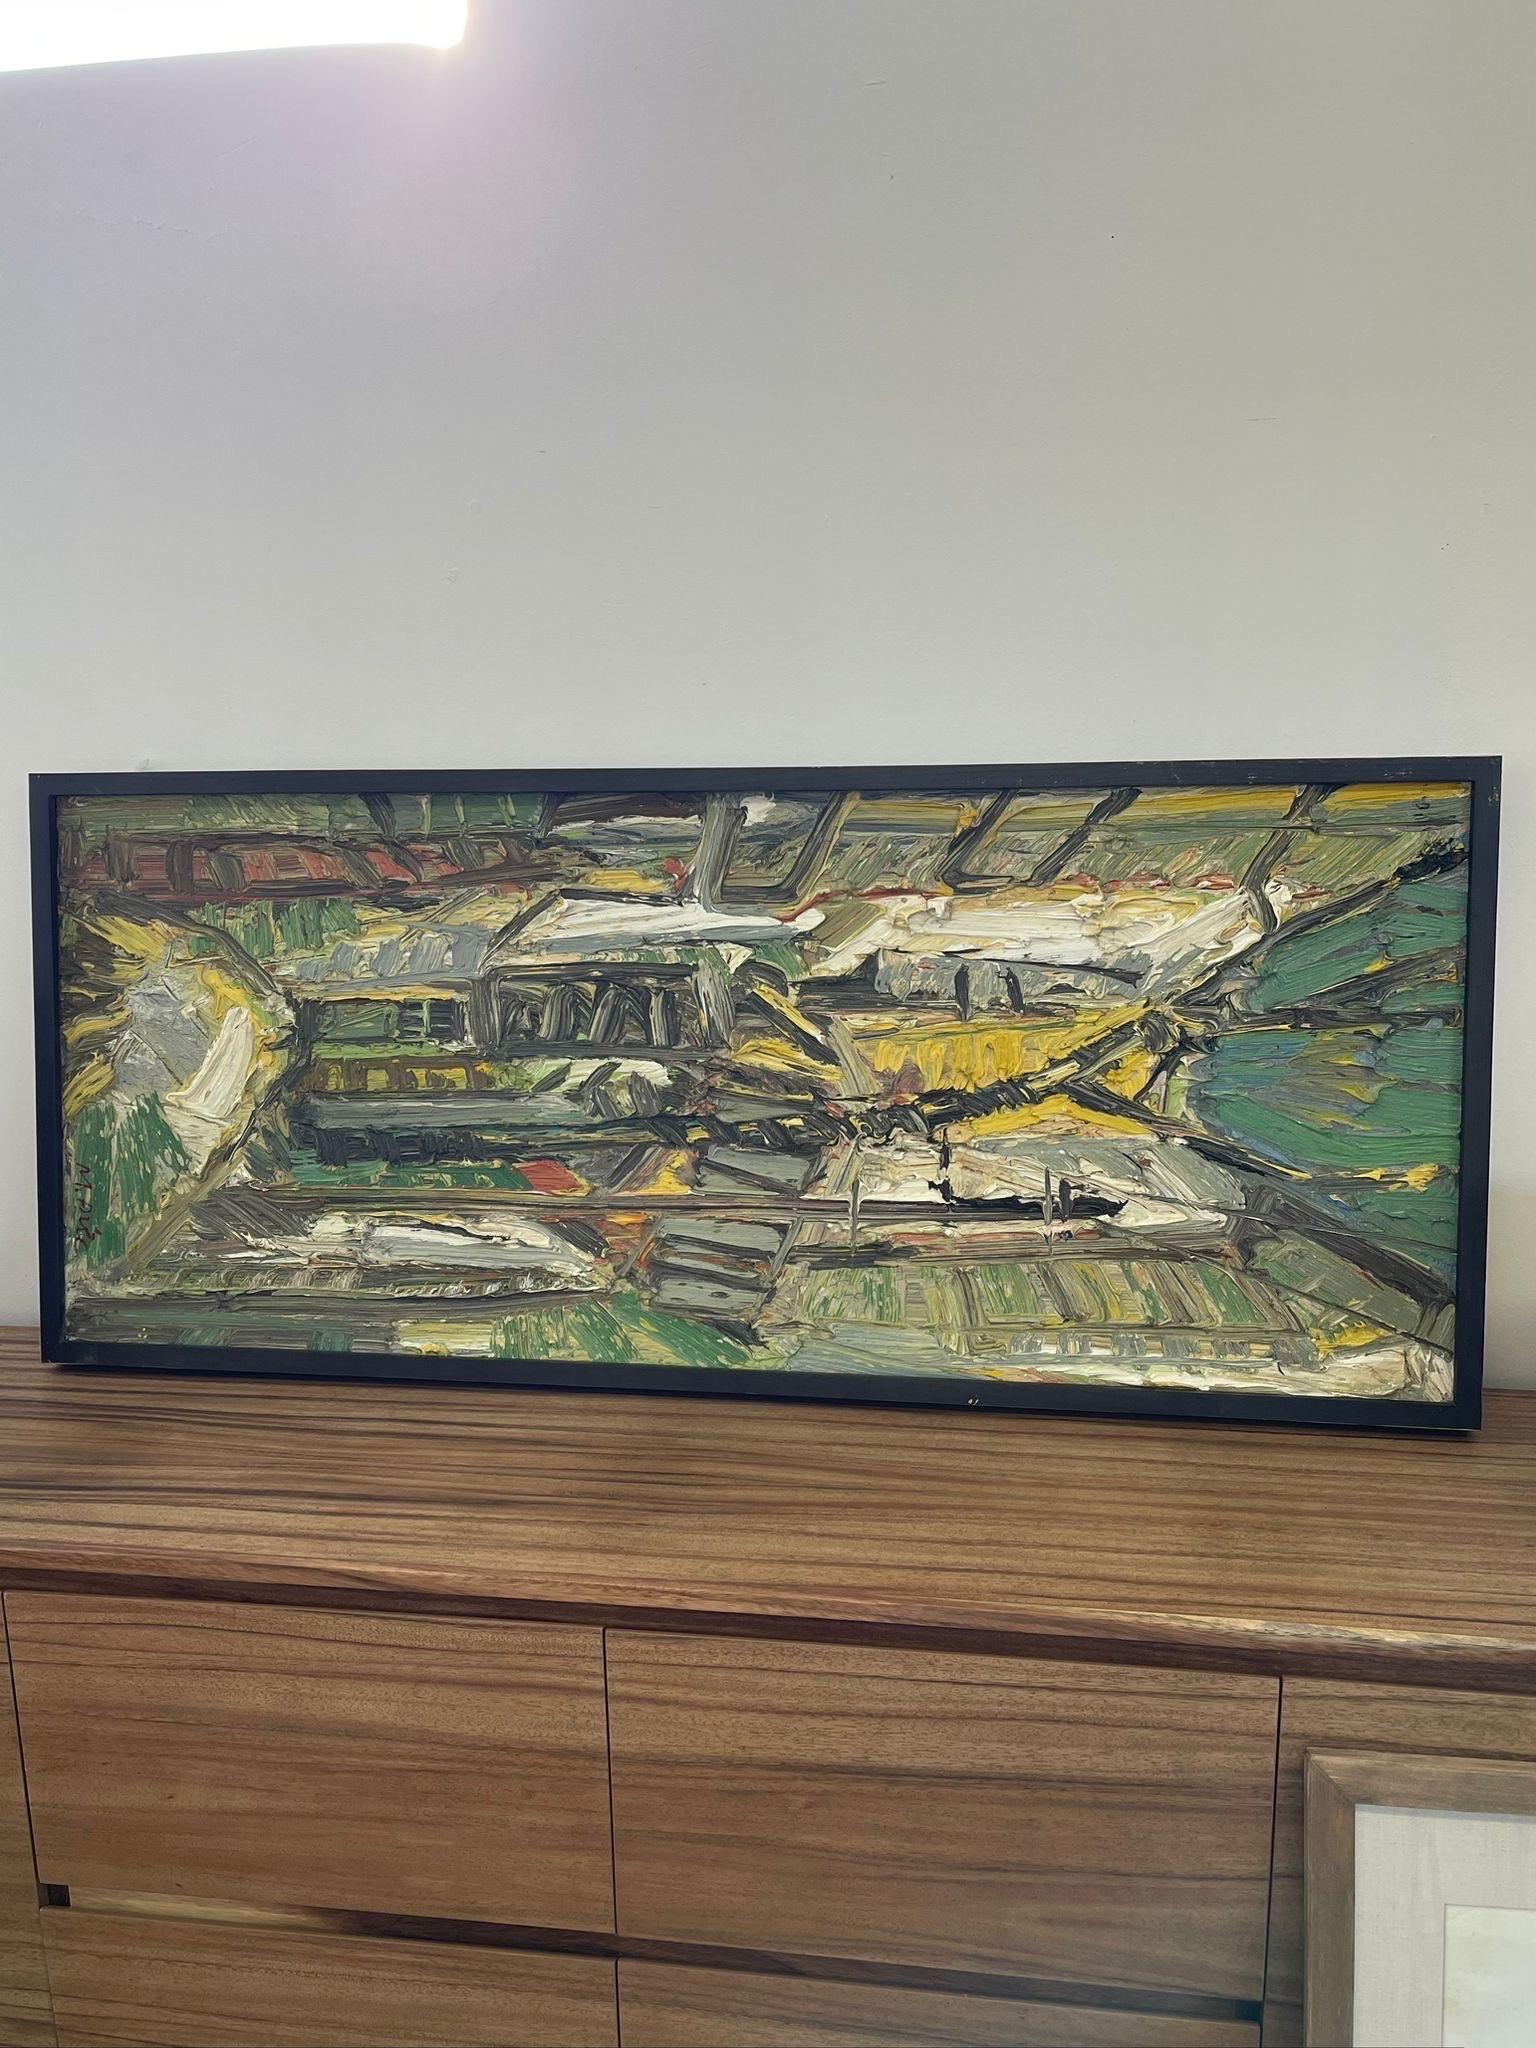 Framed Artwork within a Black Frame. Signed M. Bile as Pictured. Textured Paint Creates a 3D Effect. Green and Yellow Color Palette.Abstract City Landscape.

Dimensions. 54 W ; 3 D ; 23 H